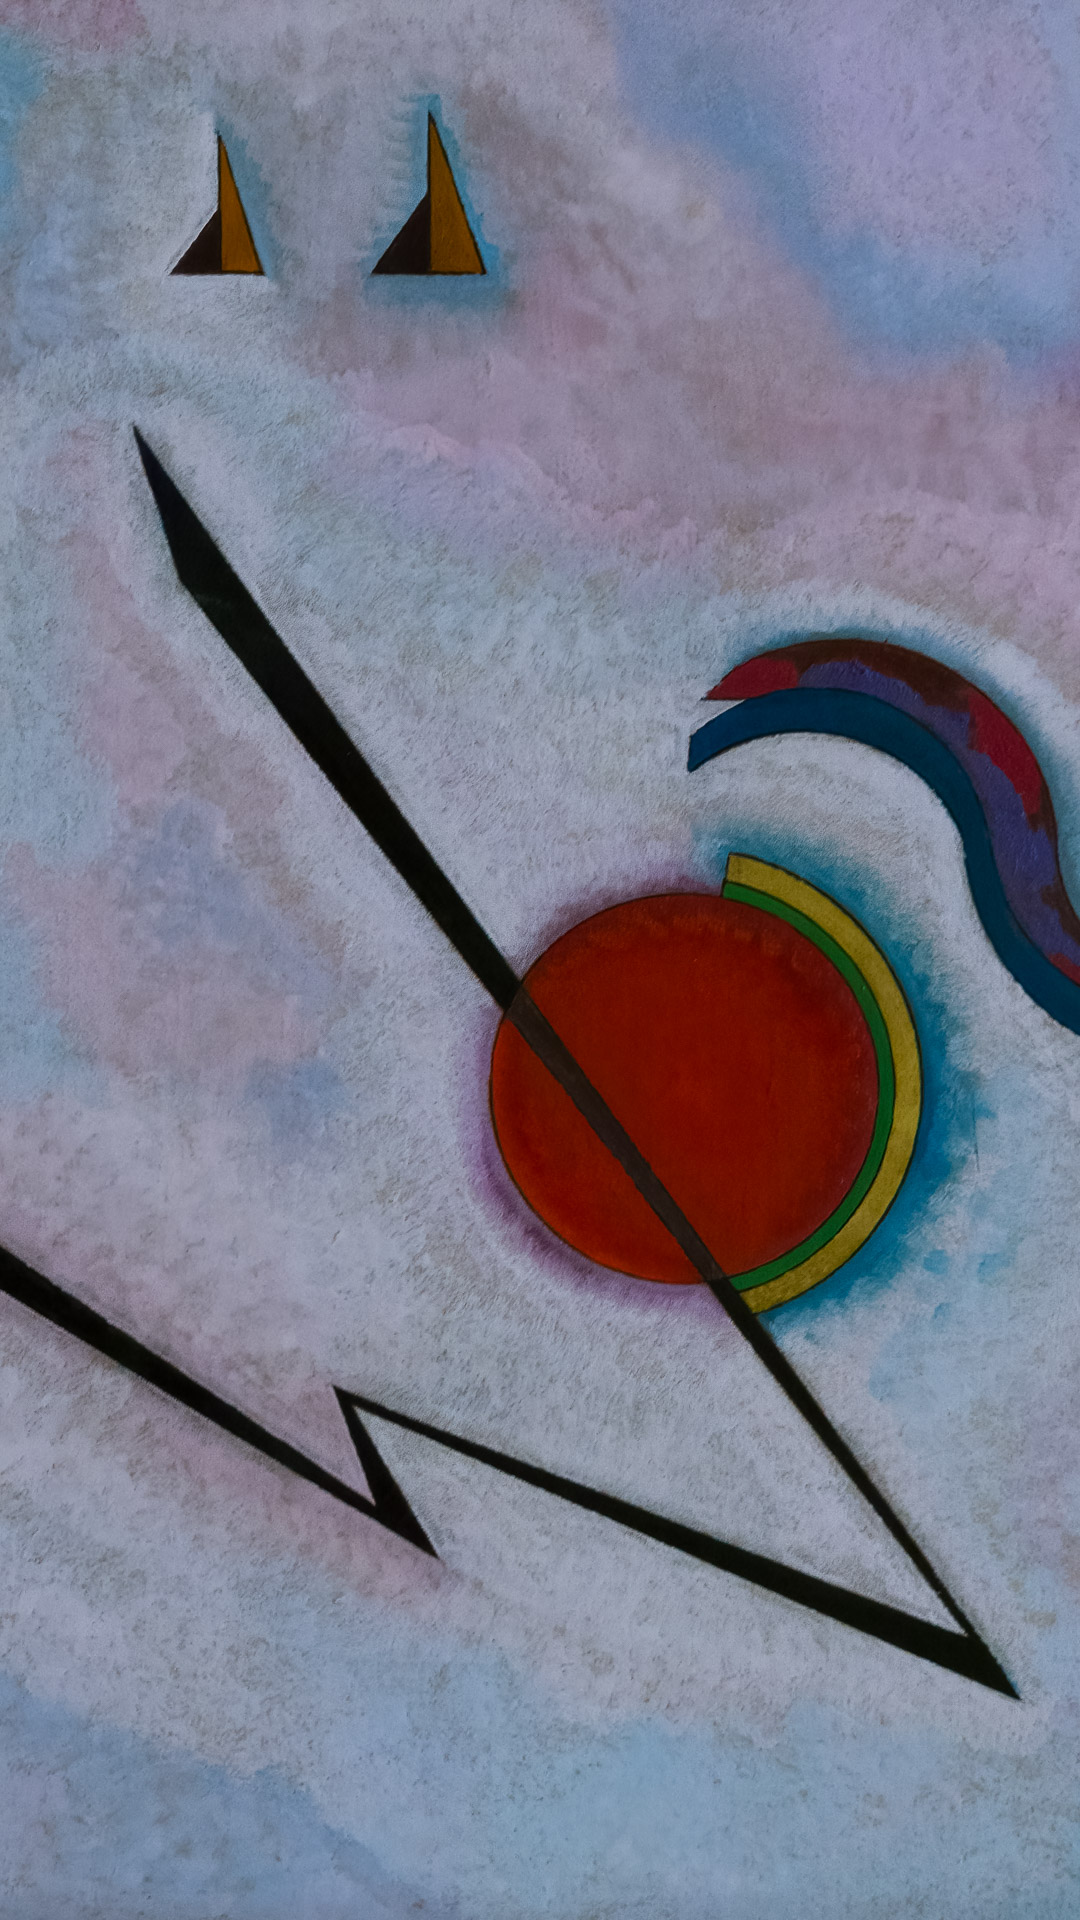 Elevate your phone screen with the abstract genius of Vasilli Kandinsky's vibrant artworks.